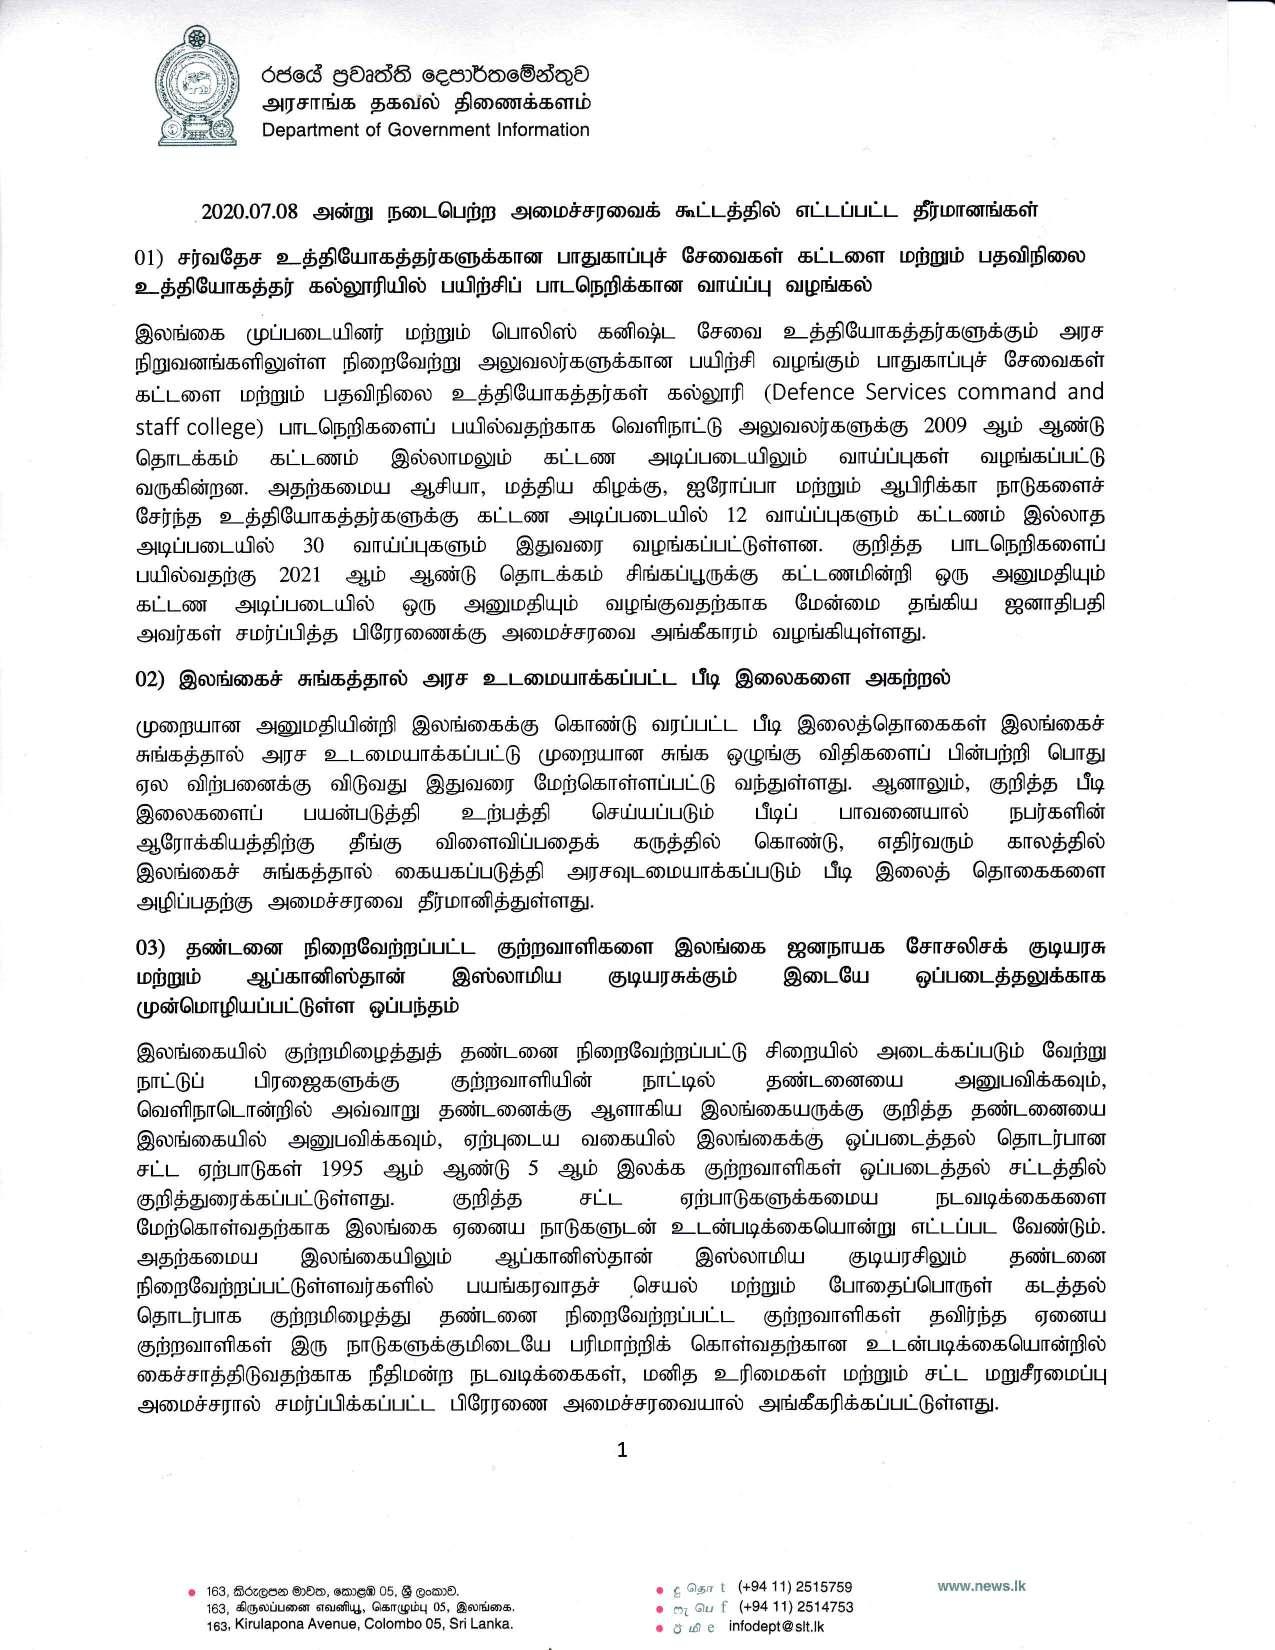 Cabinet Decision on 08.07.2020 TAMIL page 001